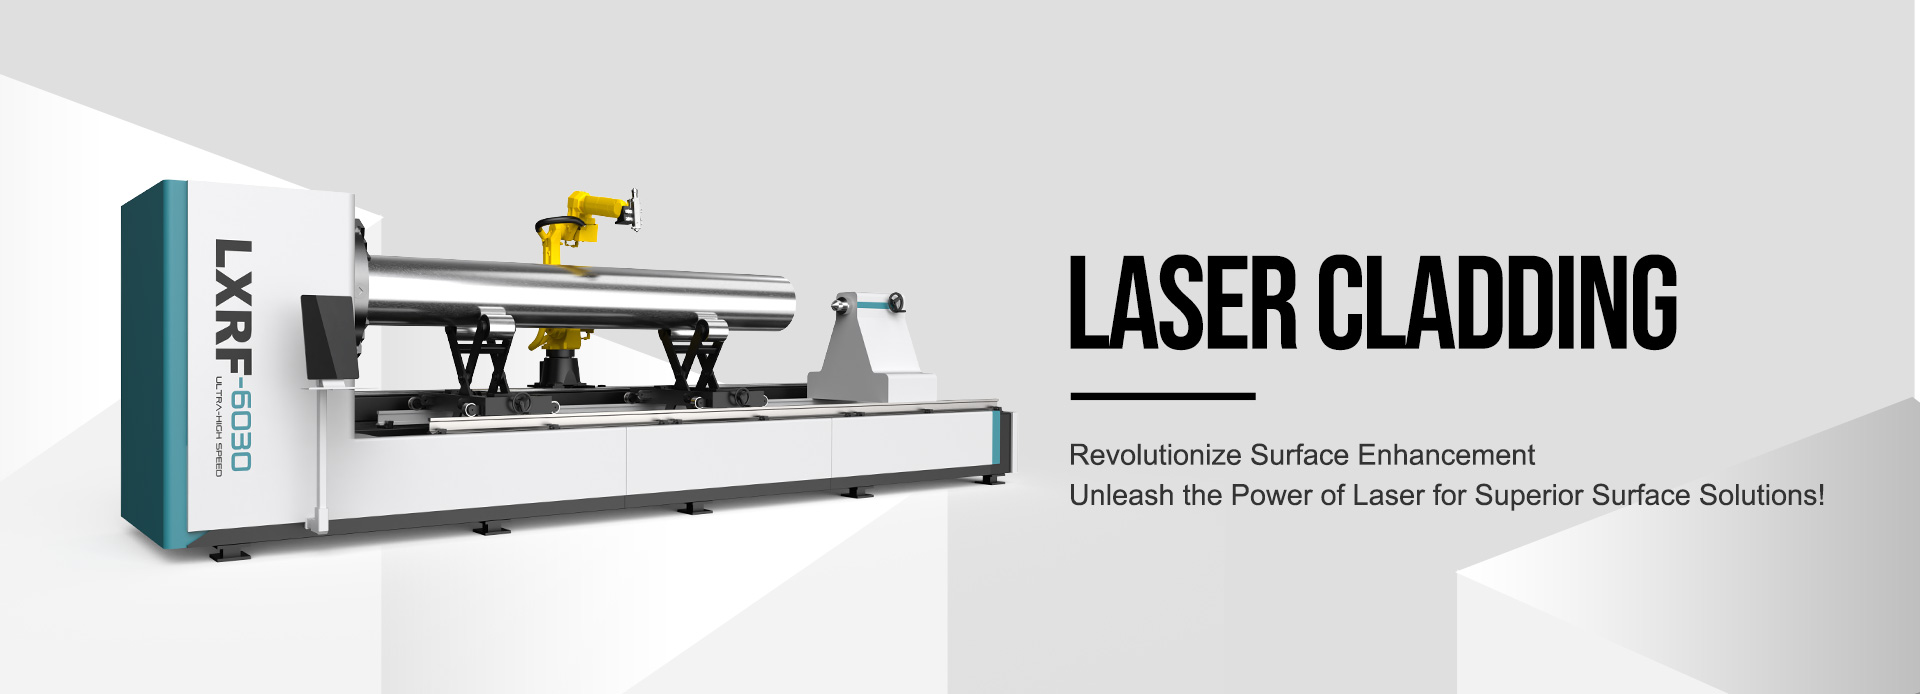 LXRF-6030 High precision single axis positioner laser cladding CNC robot